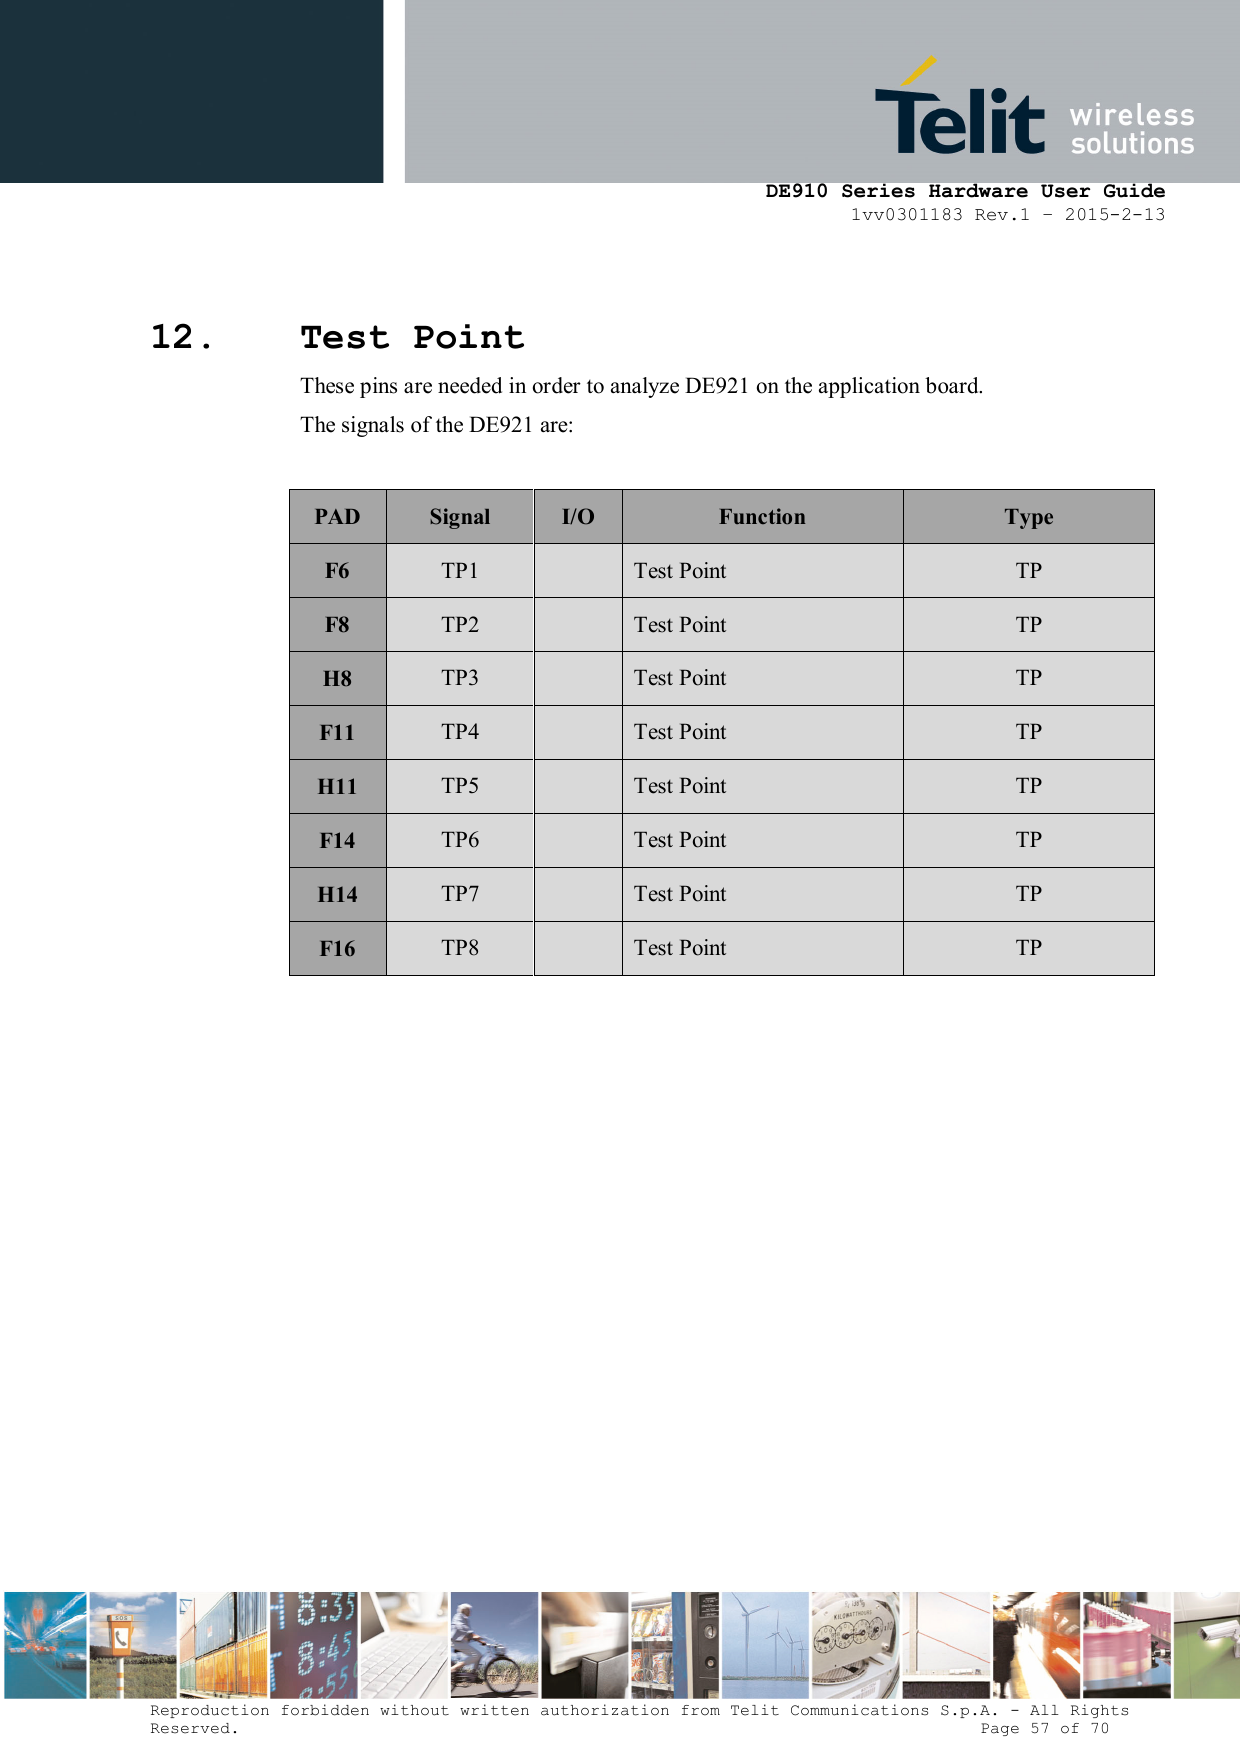      DE910 Series Hardware User Guide 1vv0301183 Rev.1 – 2015-2-13 Reproduction forbidden without written authorization from Telit Communications S.p.A. - All Rights Reserved.                                                                          Page 57 of 70 12. Test Point These pins are needed in order to analyze DE921 on the application board. The signals of the DE921 are:  PAD  Signal  I/O  Function  Type F6  TP1    Test Point  TP F8  TP2    Test Point  TP H8  TP3    Test Point  TP F11  TP4    Test Point  TP H11  TP5    Test Point  TP F14  TP6    Test Point  TP H14  TP7    Test Point  TP F16  TP8    Test Point  TP  